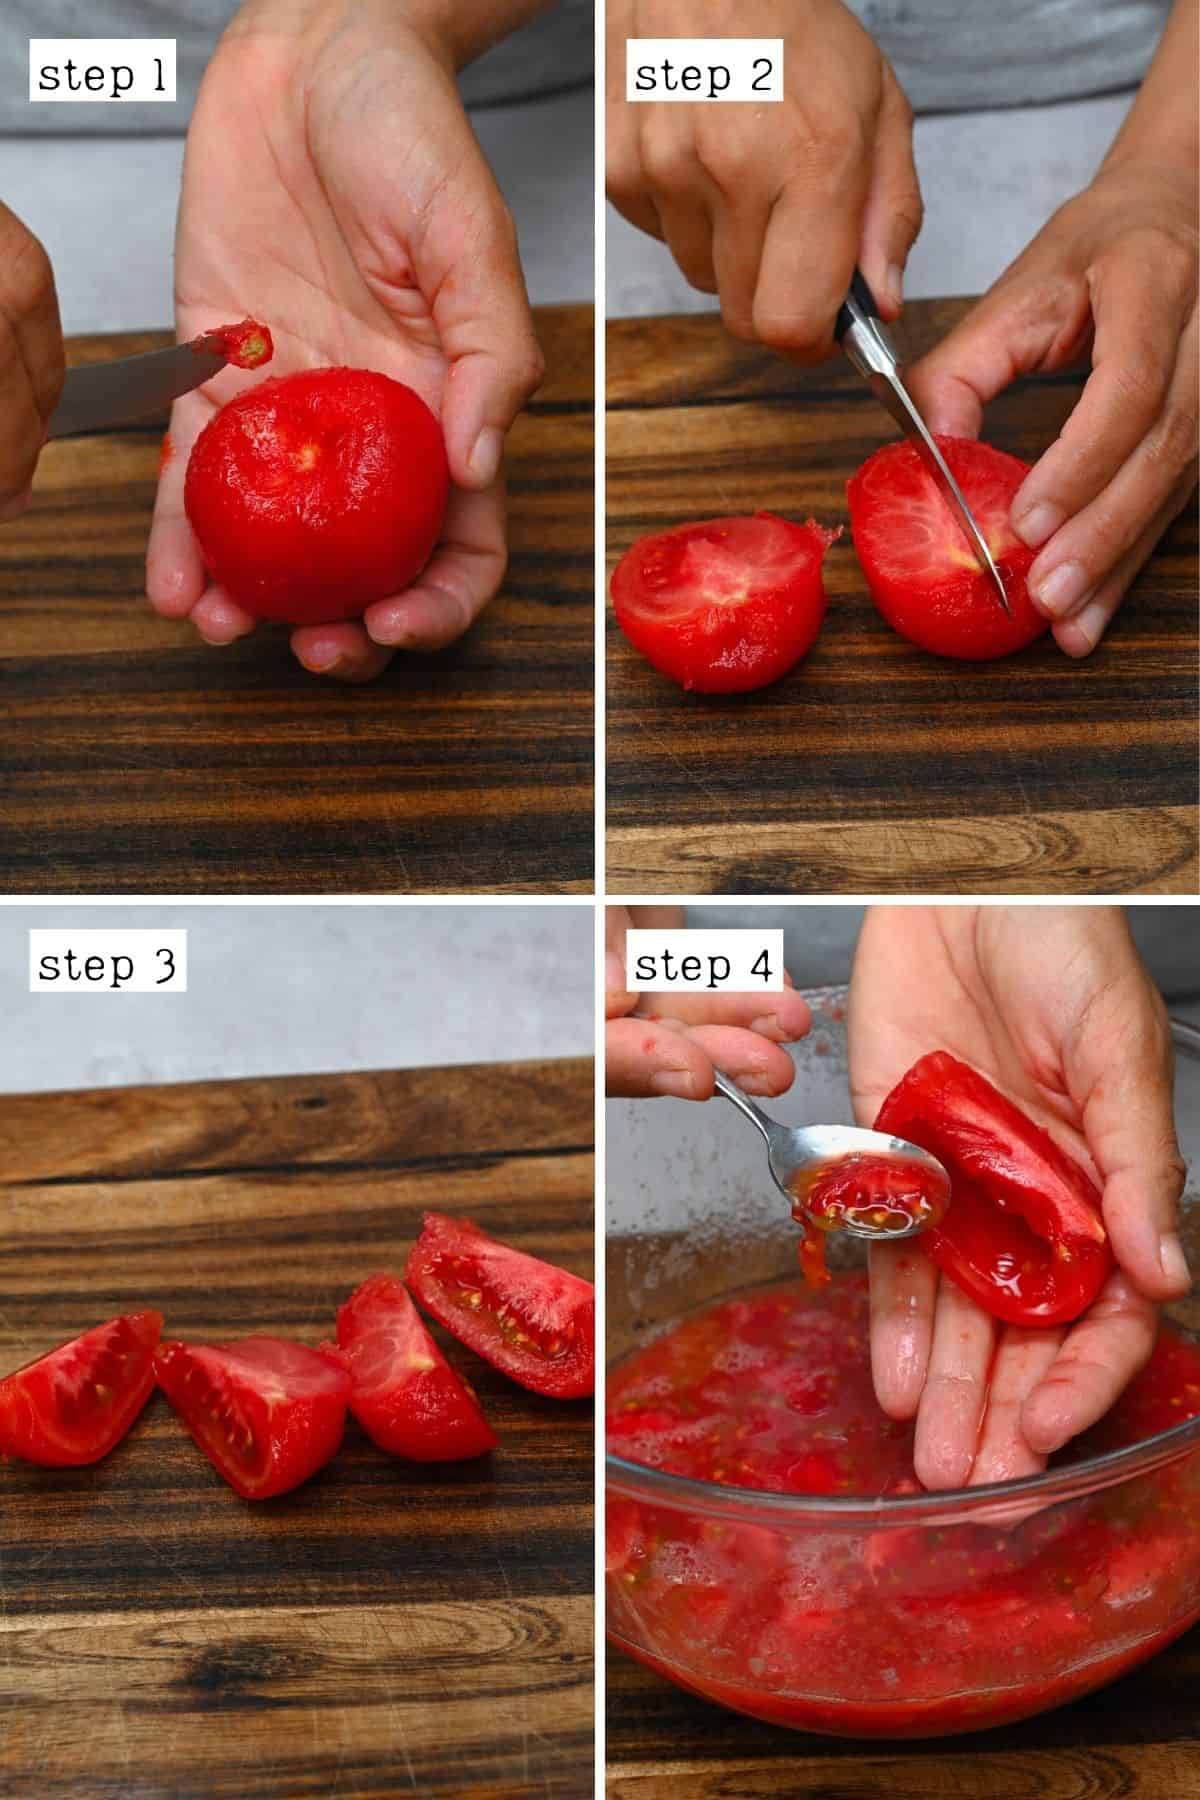 Steps for cutting and deseeding tomatoes